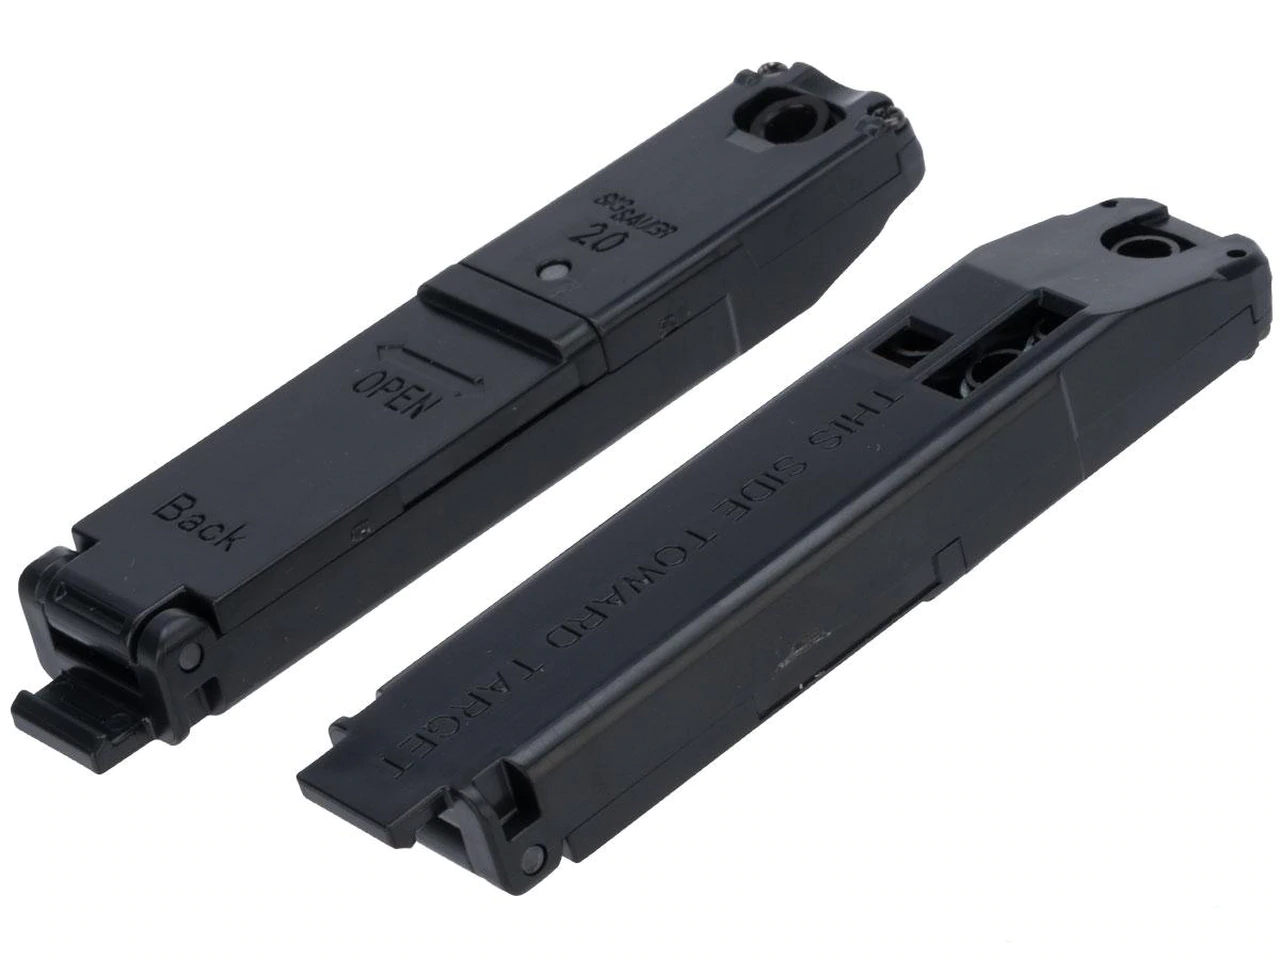 SIG Sauer .177 Caliber 20rd Rotary Cylinder Magazine for M17 Airguns - 2 Pack